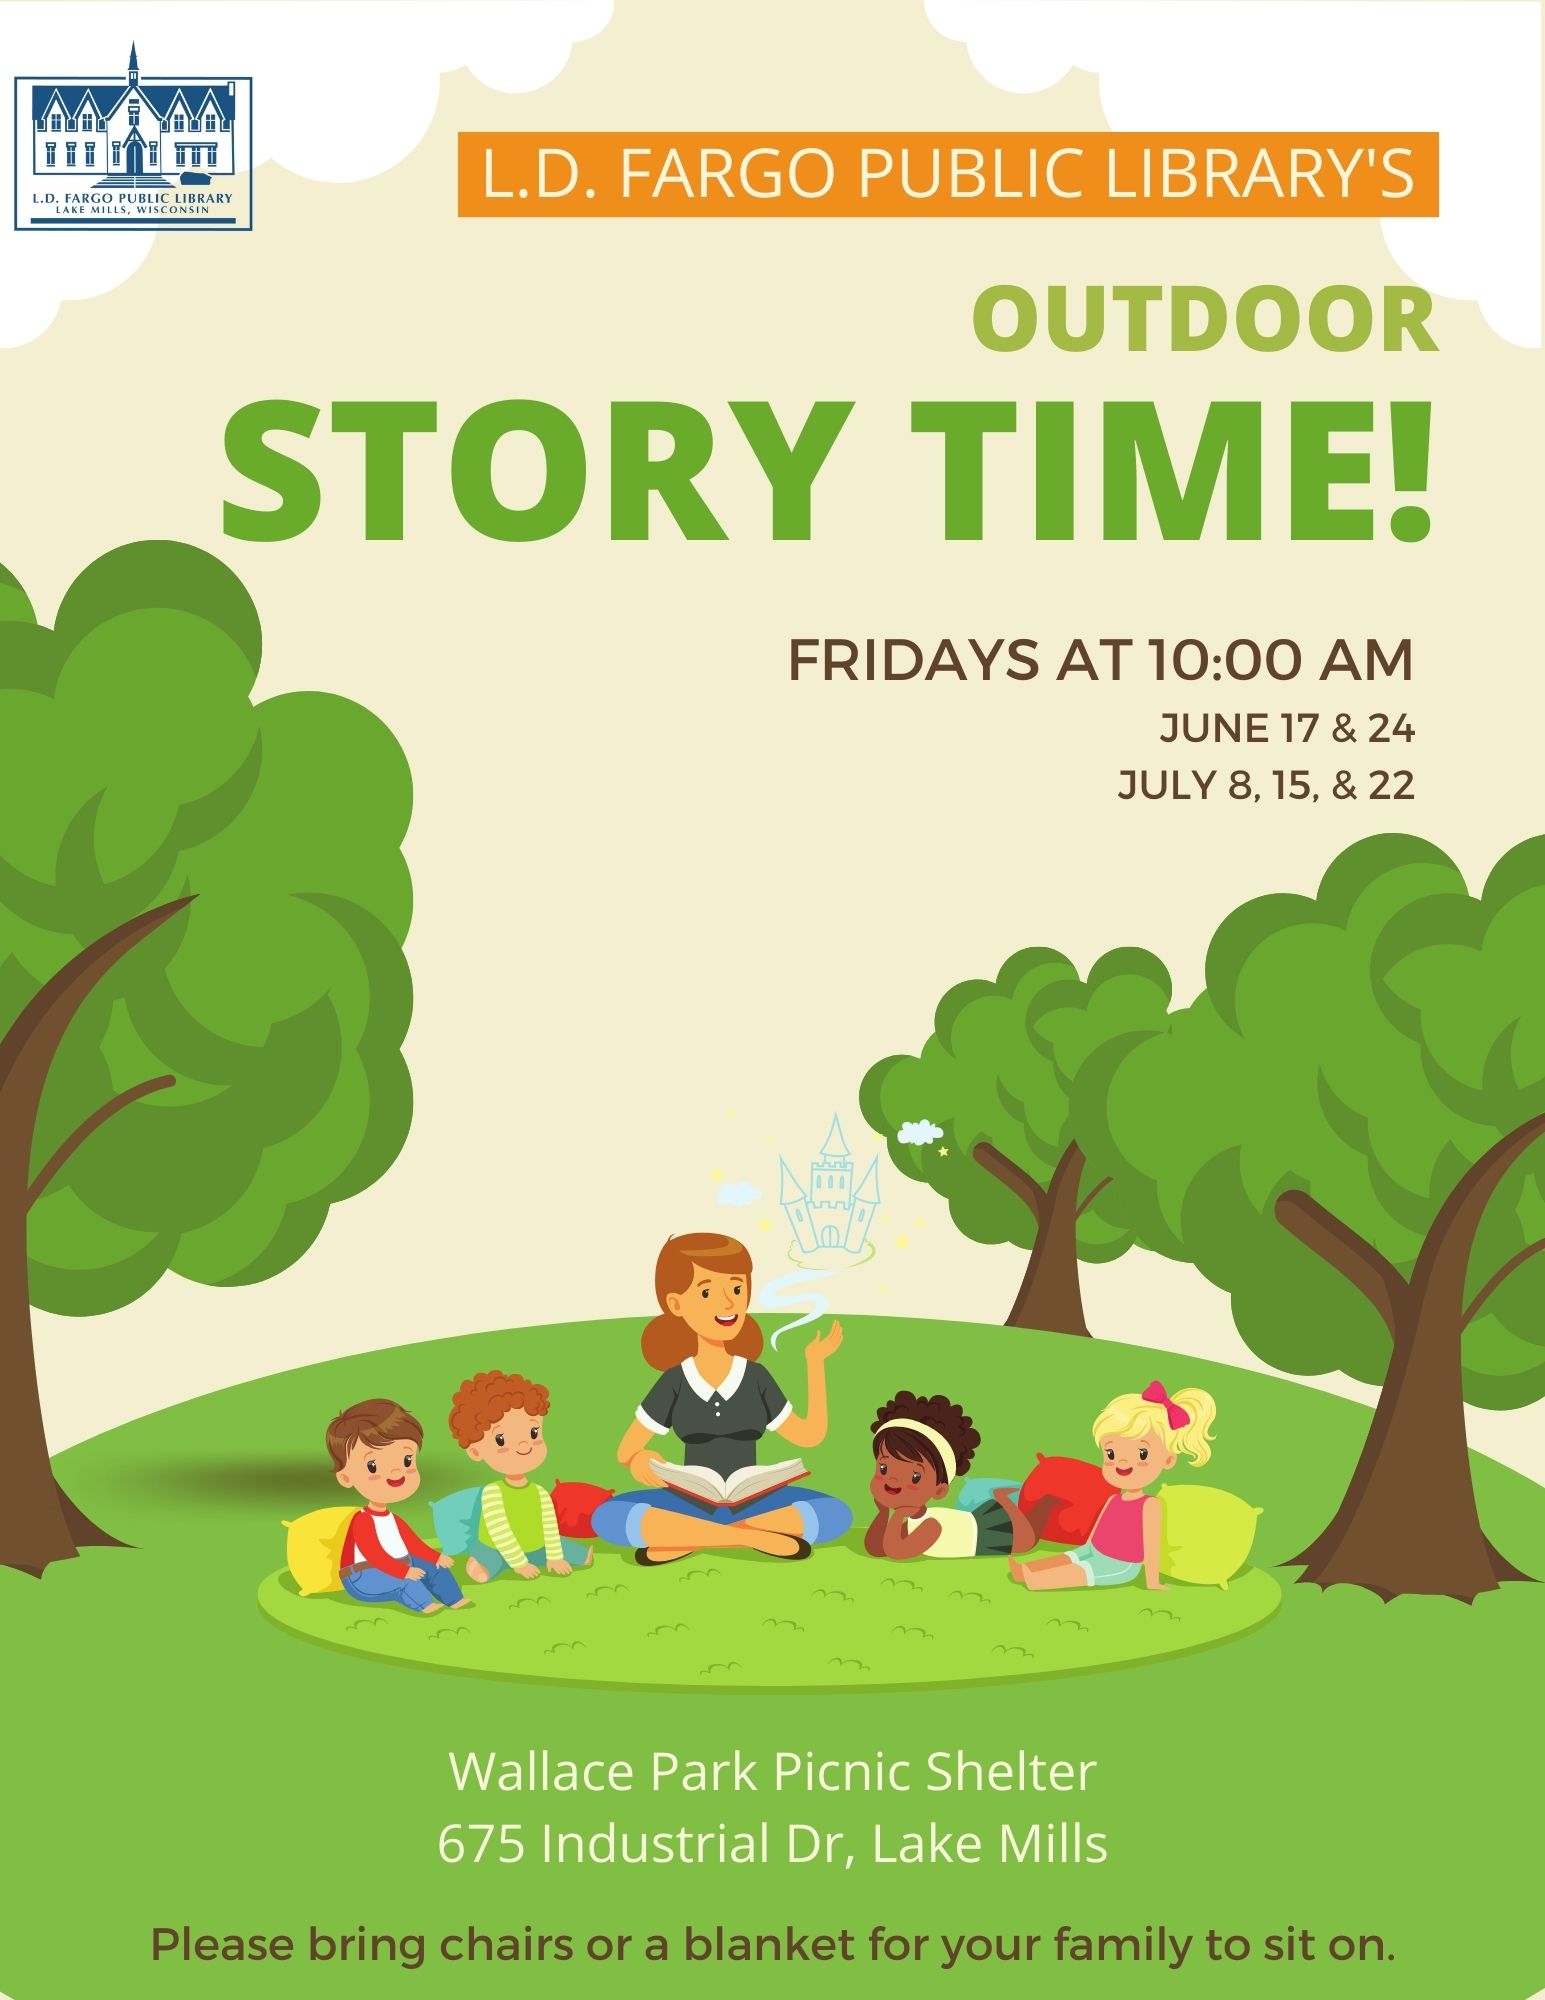 Outdoor Story Time at Wallace Park.  Fridays at 10:00 AM. June 17 & 24, July 8, 15, & 22.